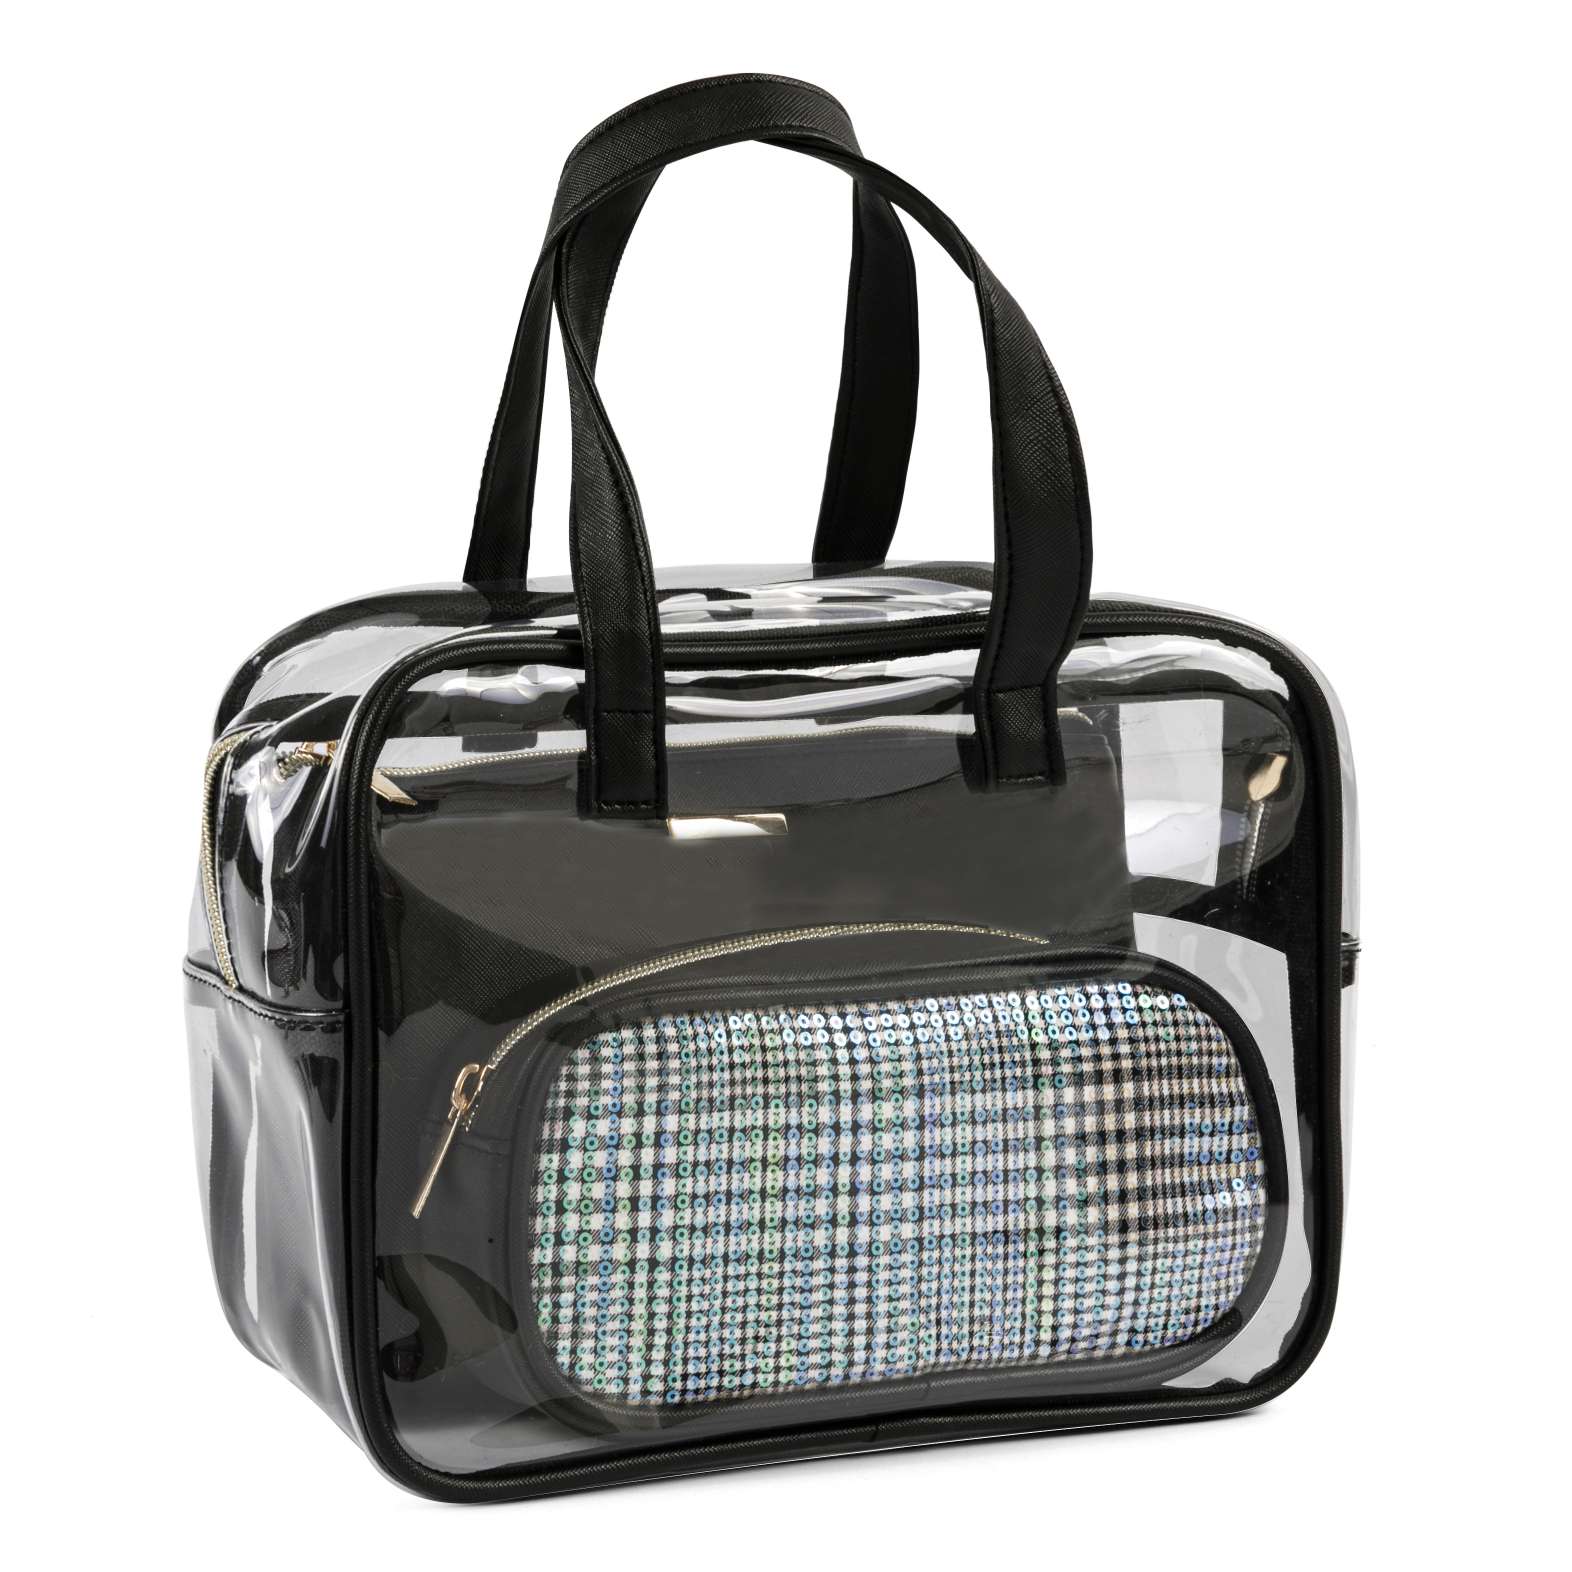 The widely used black grid sequin cosmetic bags have a zipper